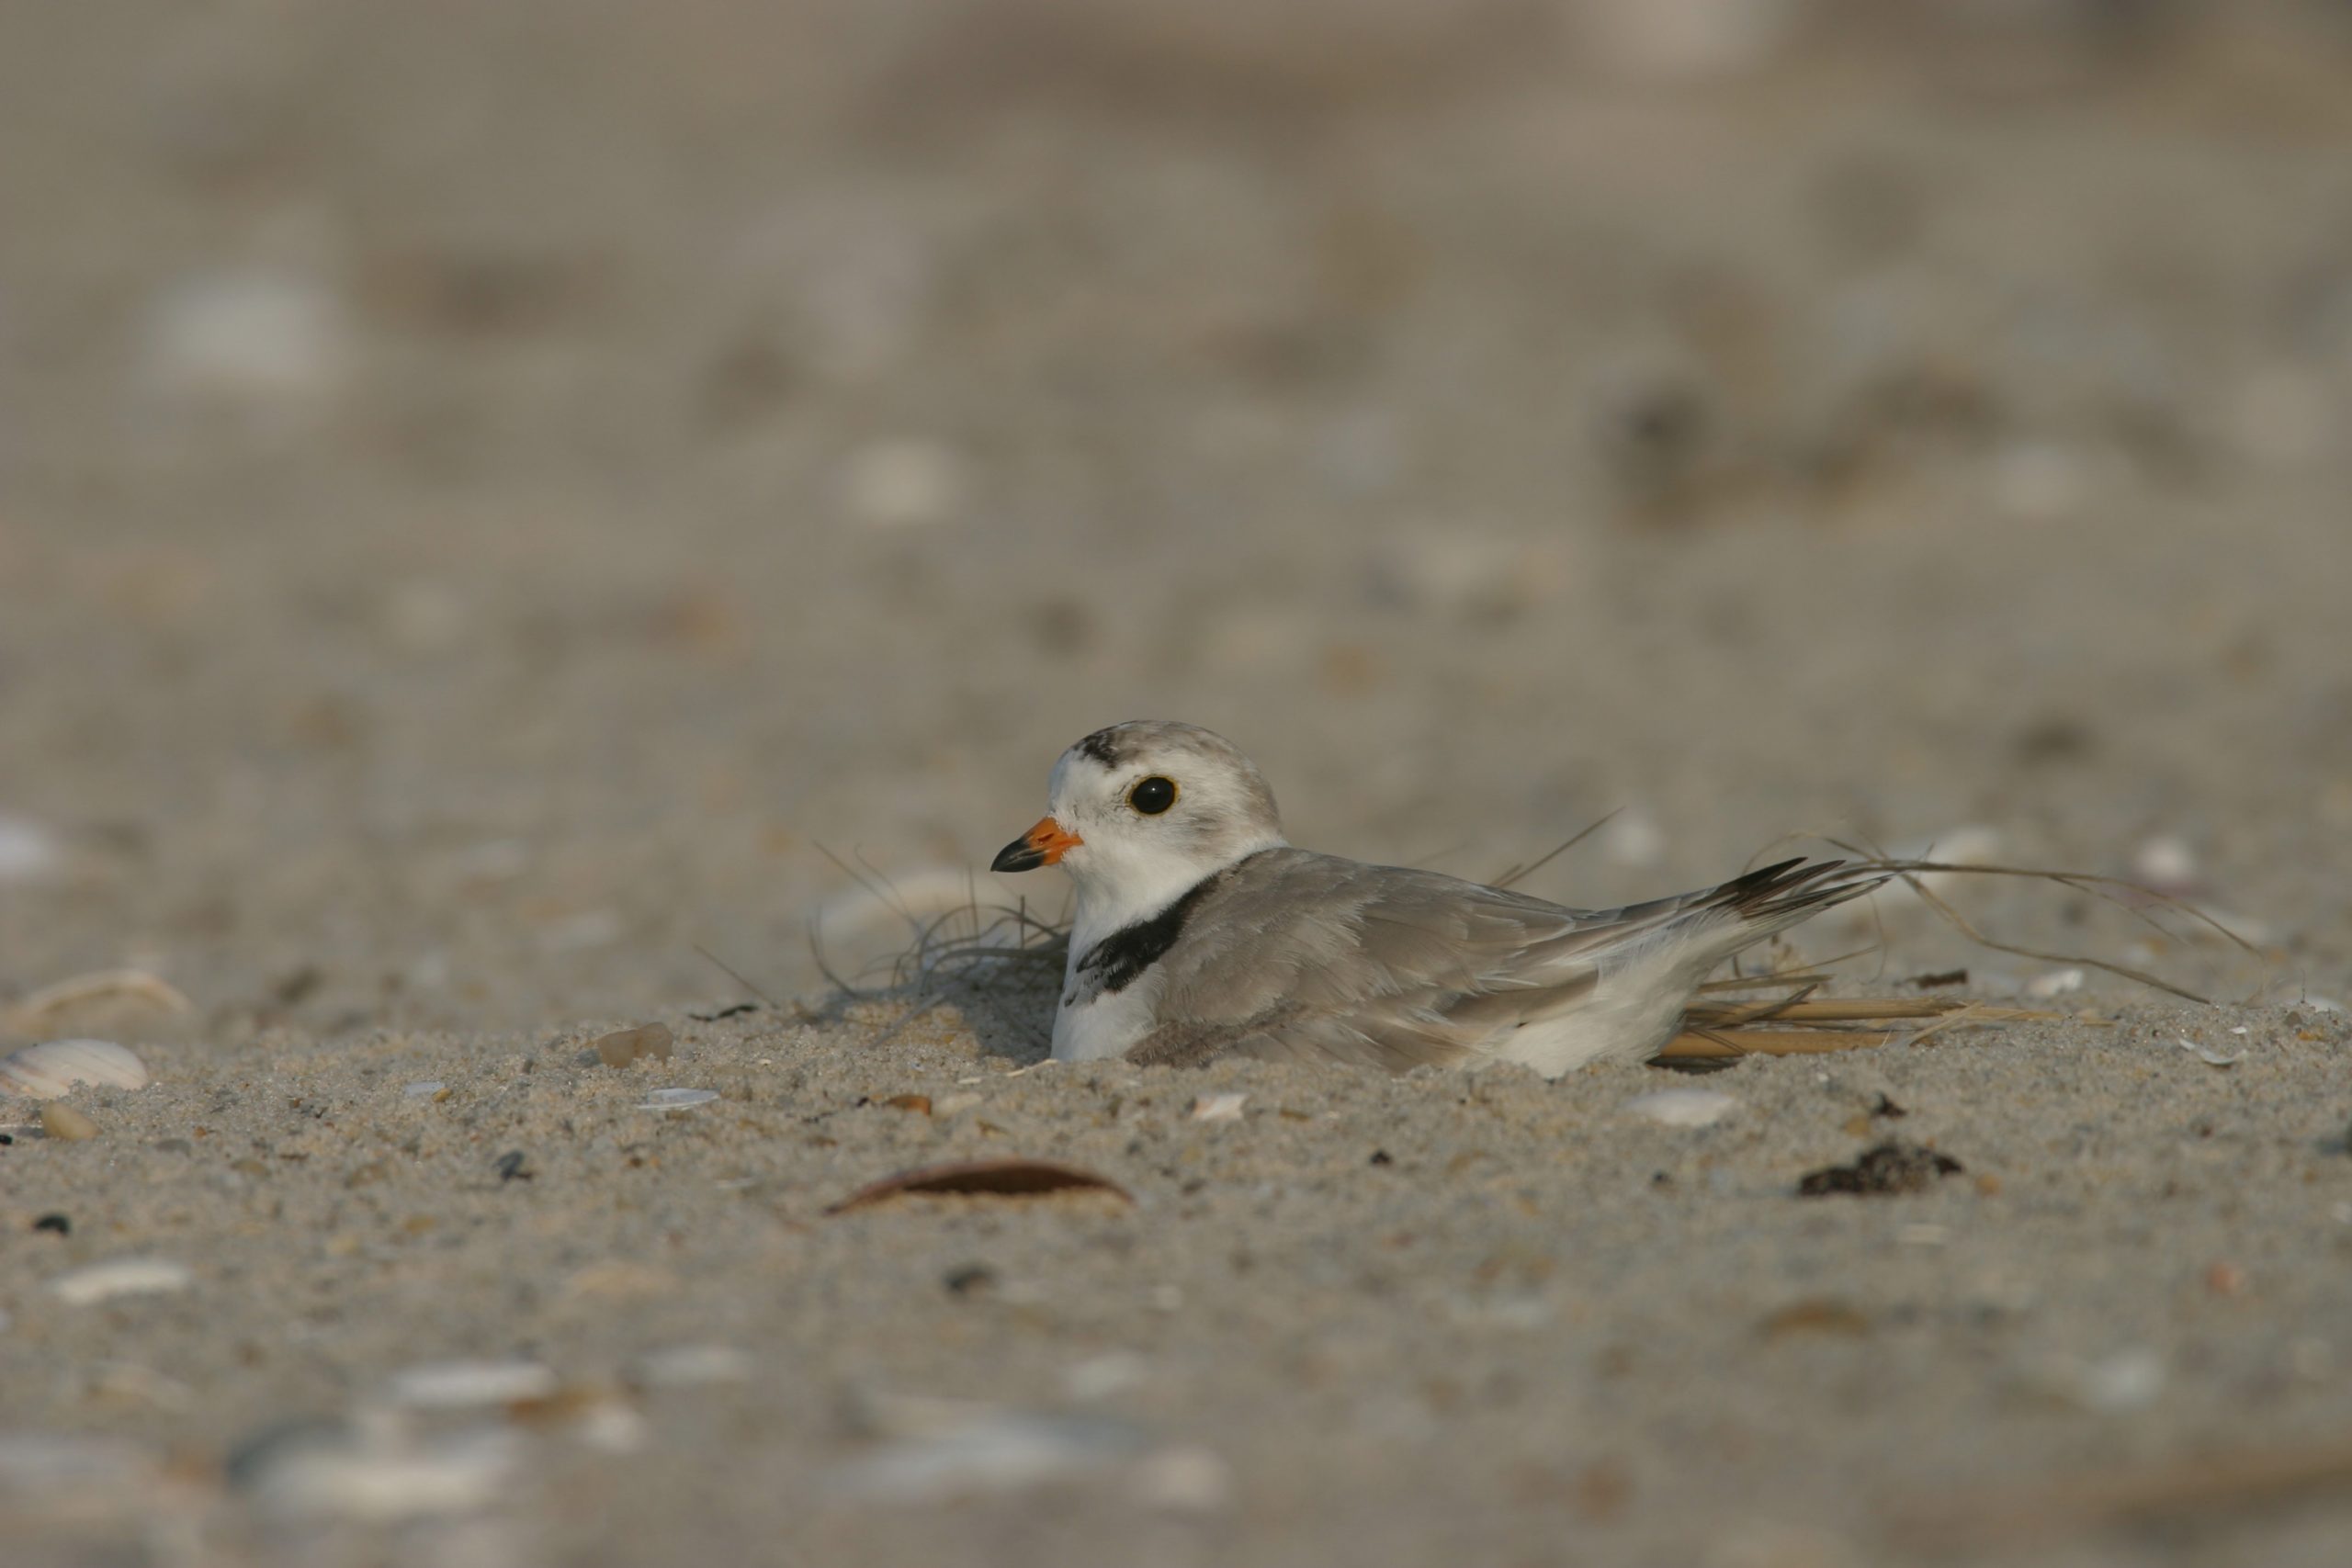 A piping plover nests on the beach.